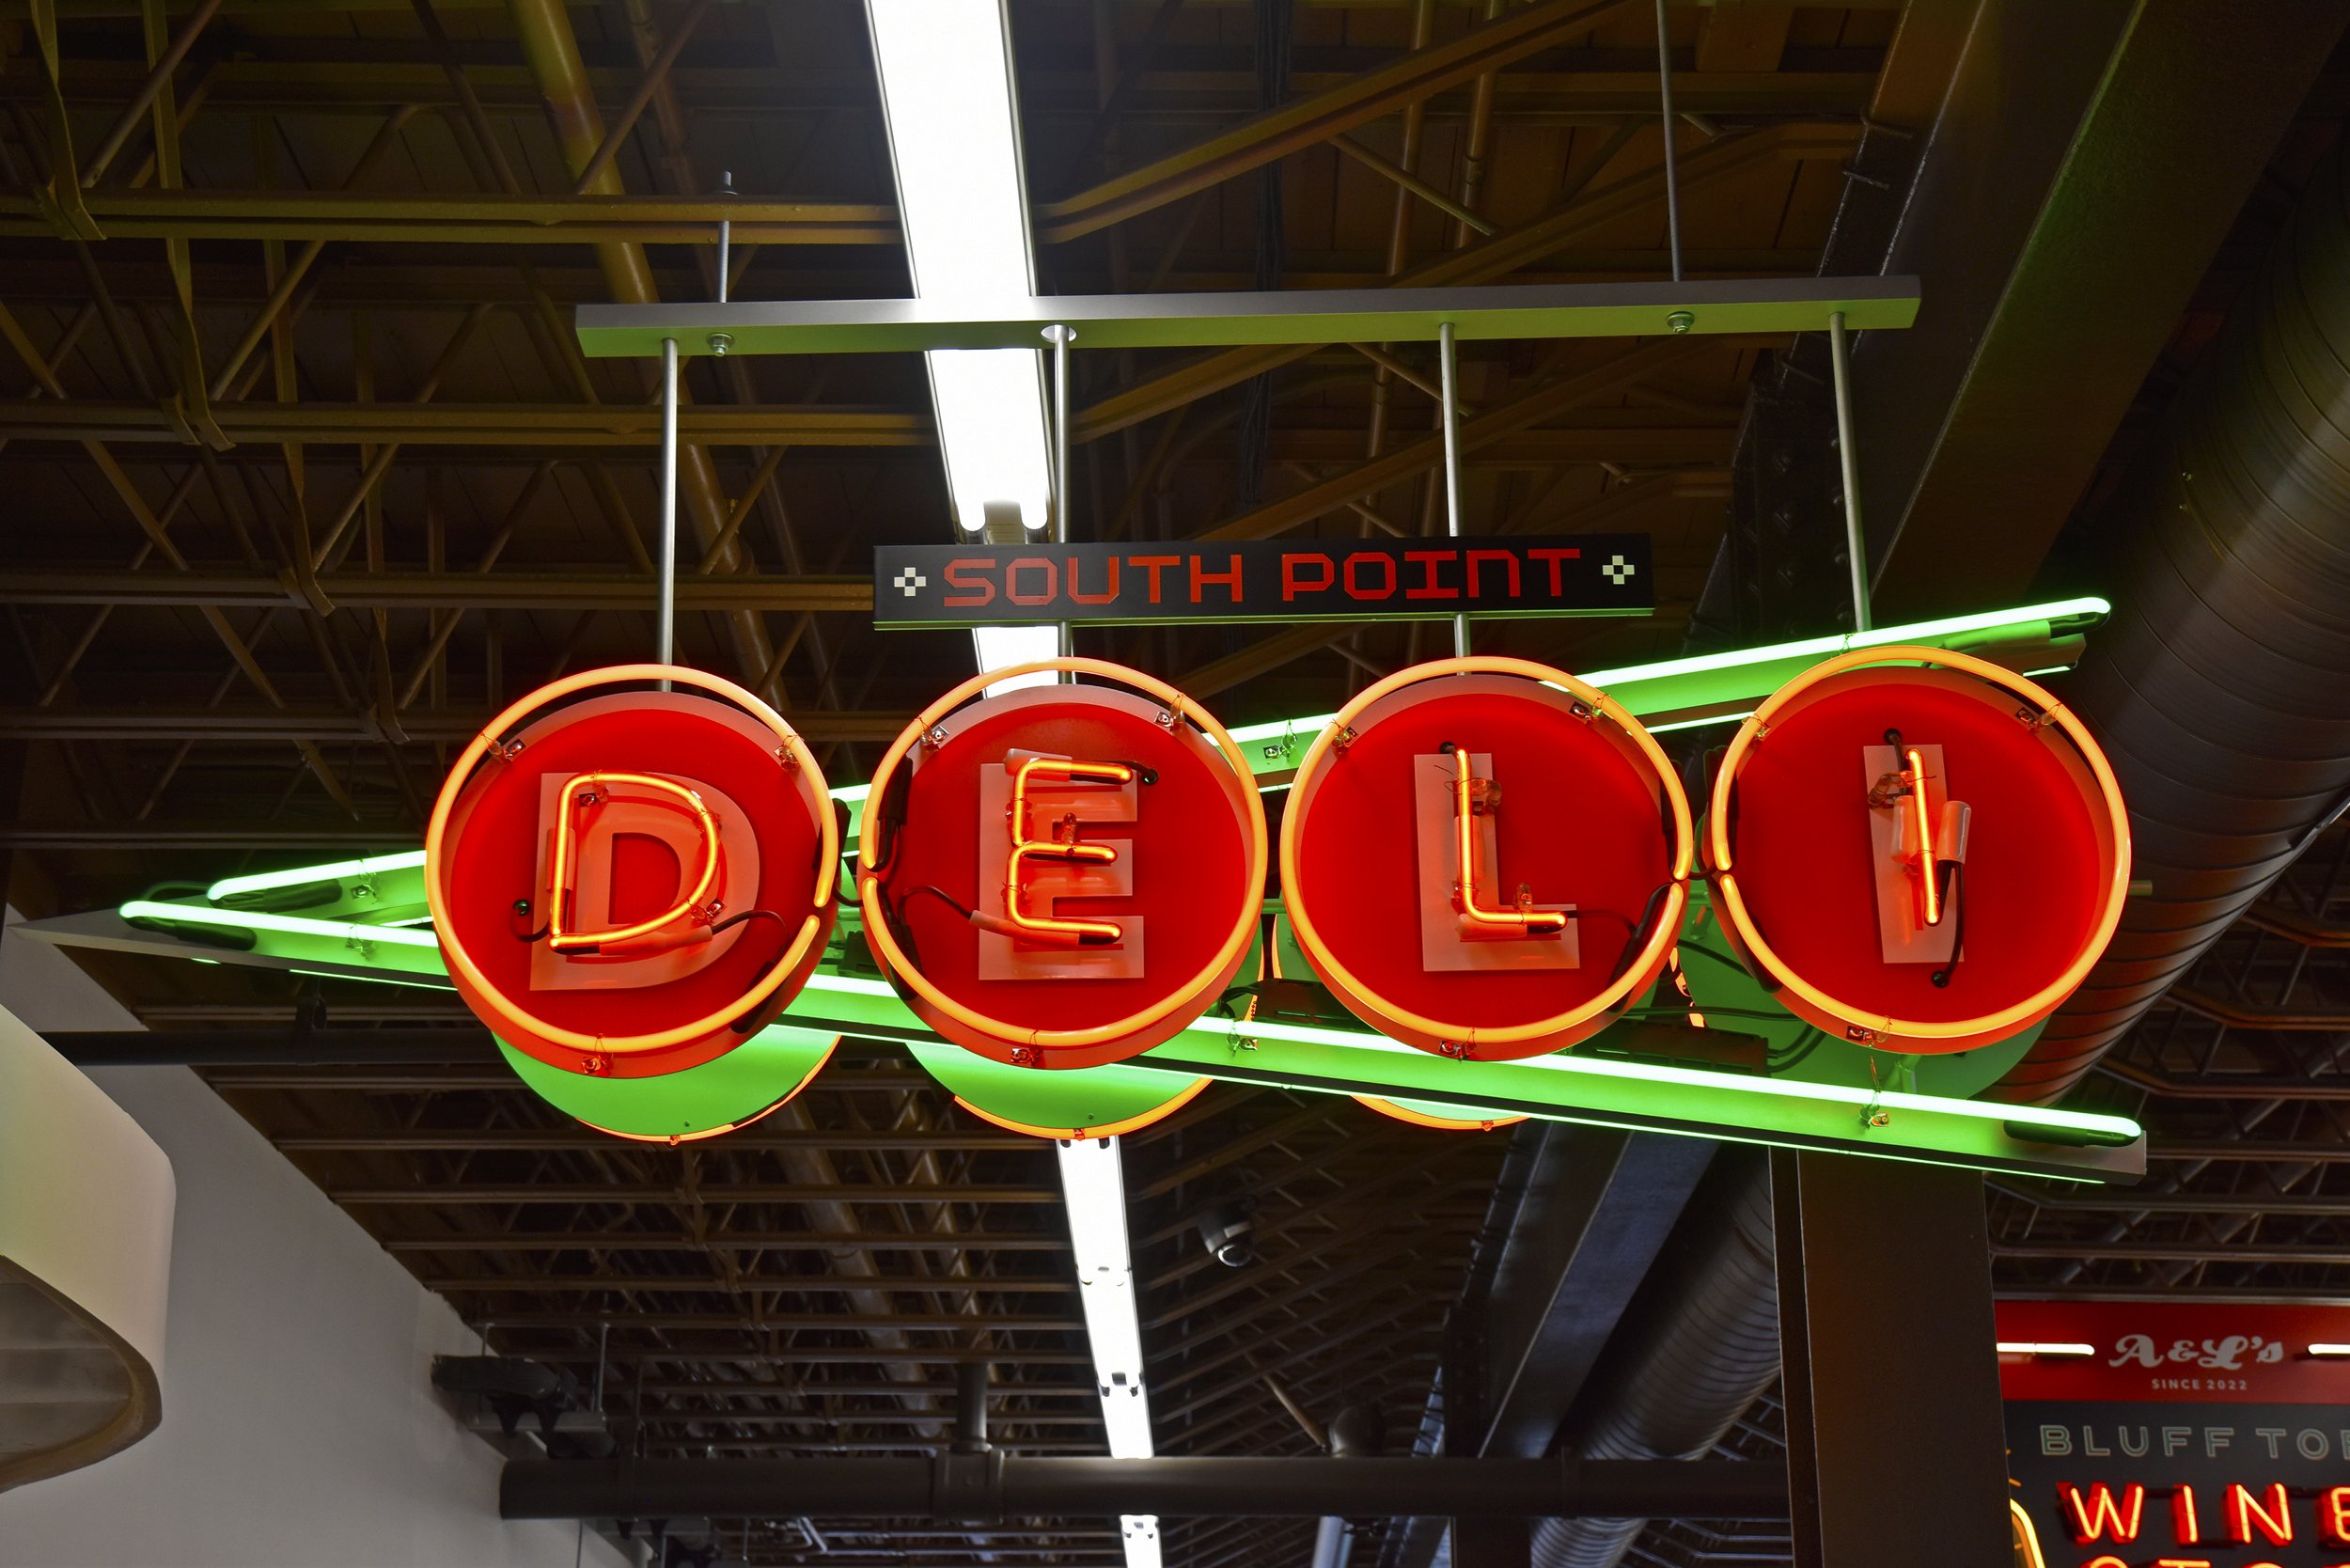  South Point Grocery  Downtown Memphis  “South Point Deli” department sign  Branding creative and design by Chuck Mitchell  Sign fabrication and installation by Frank Balton Sign Company 